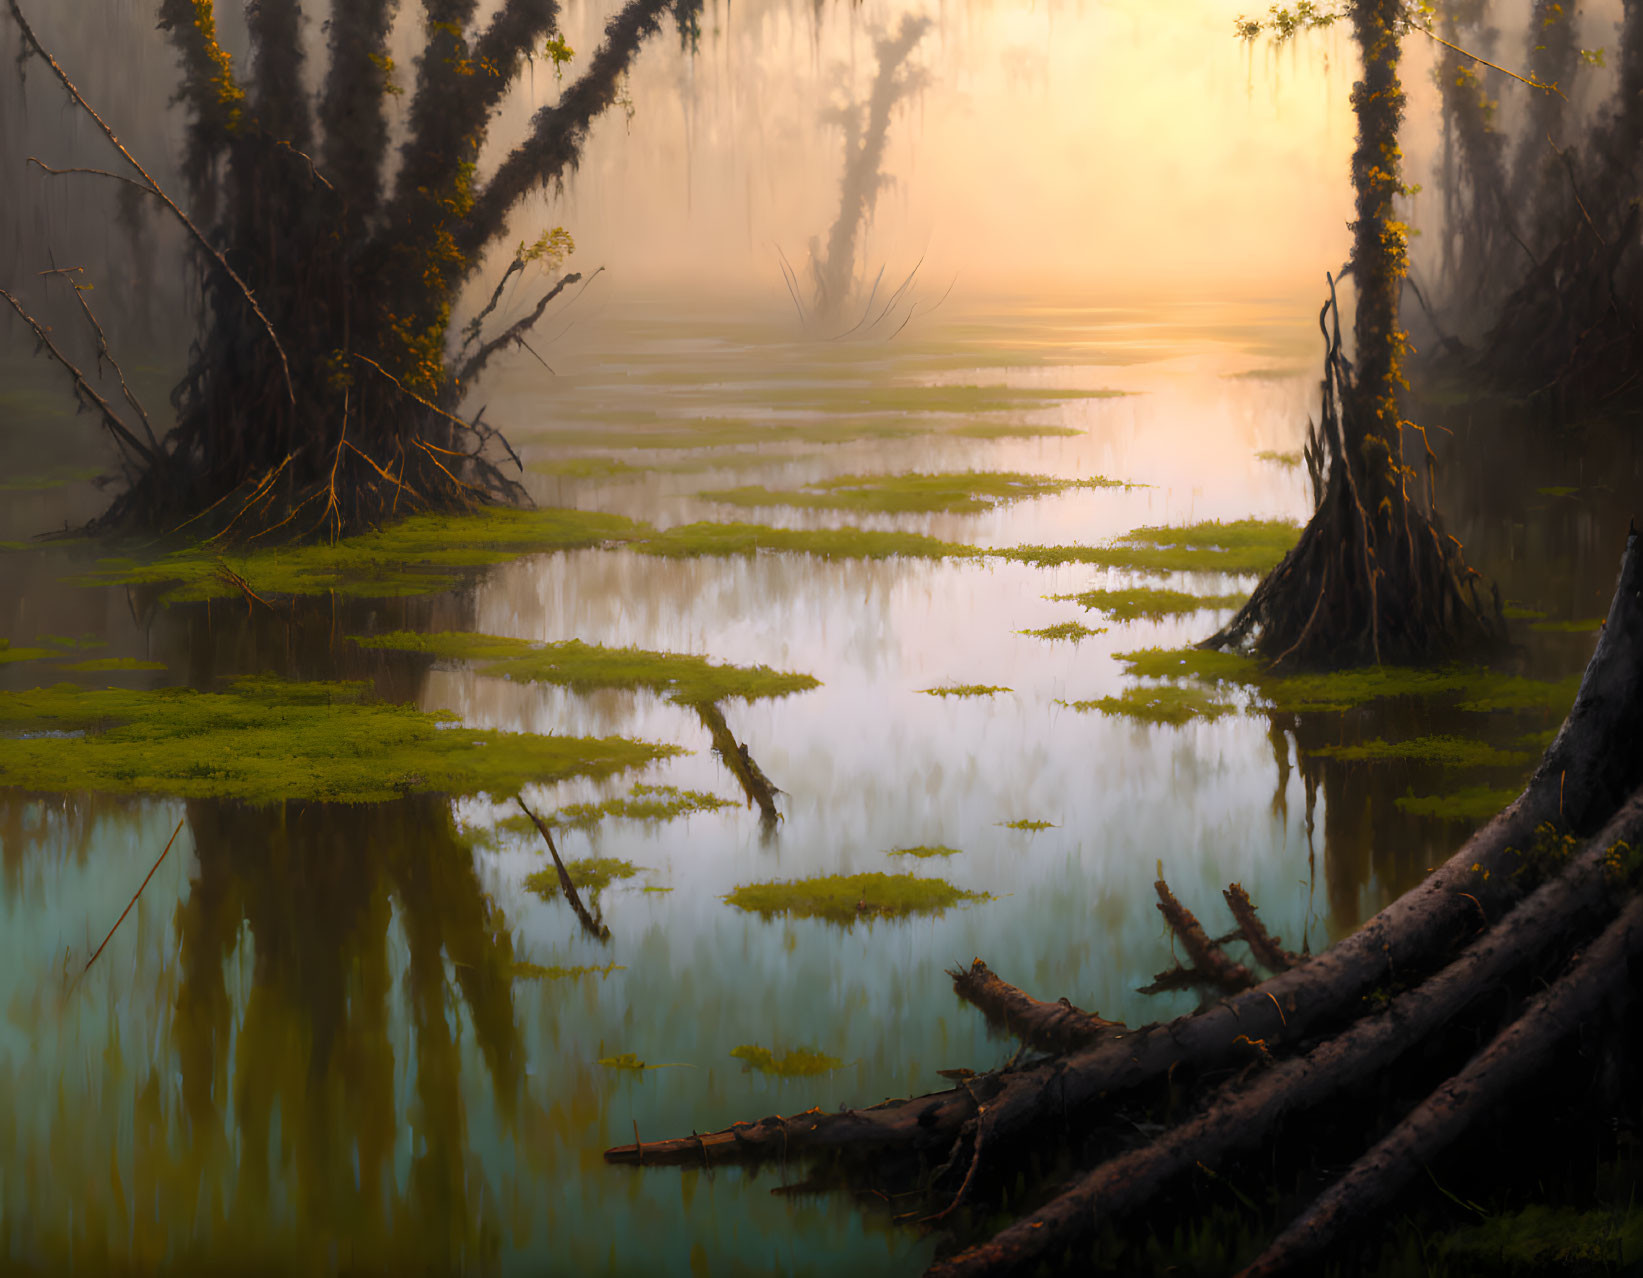 Tranquil swamp landscape with mist, sunlight, reflections, and green plants